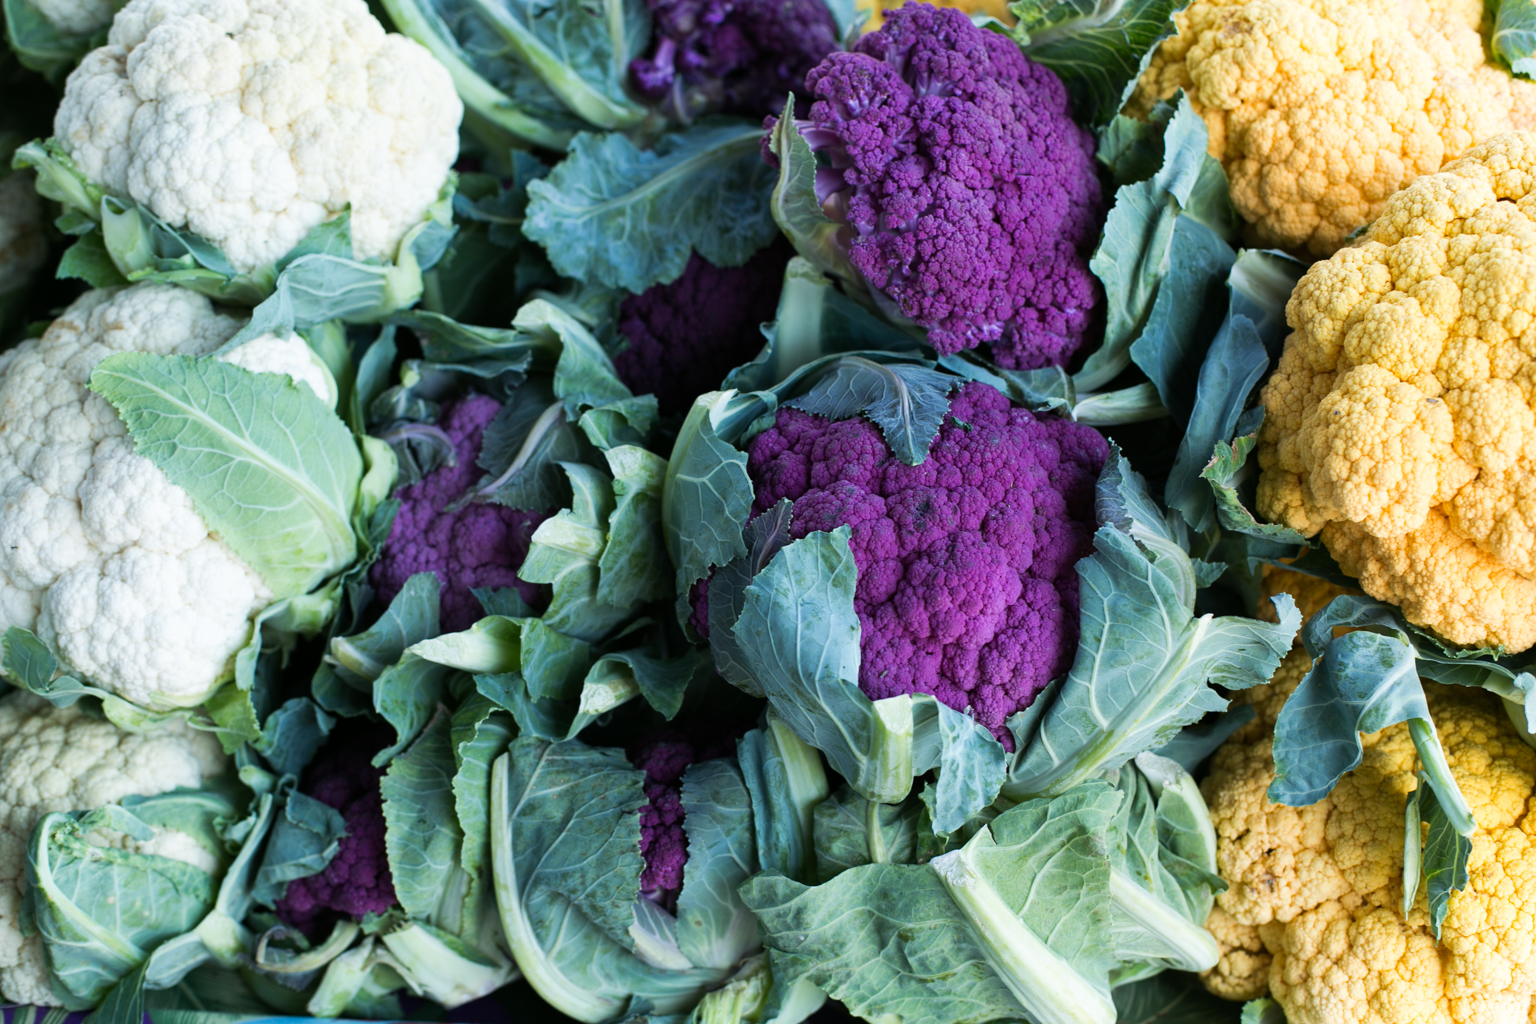 A rainbow of cauliflower for sale at the market.